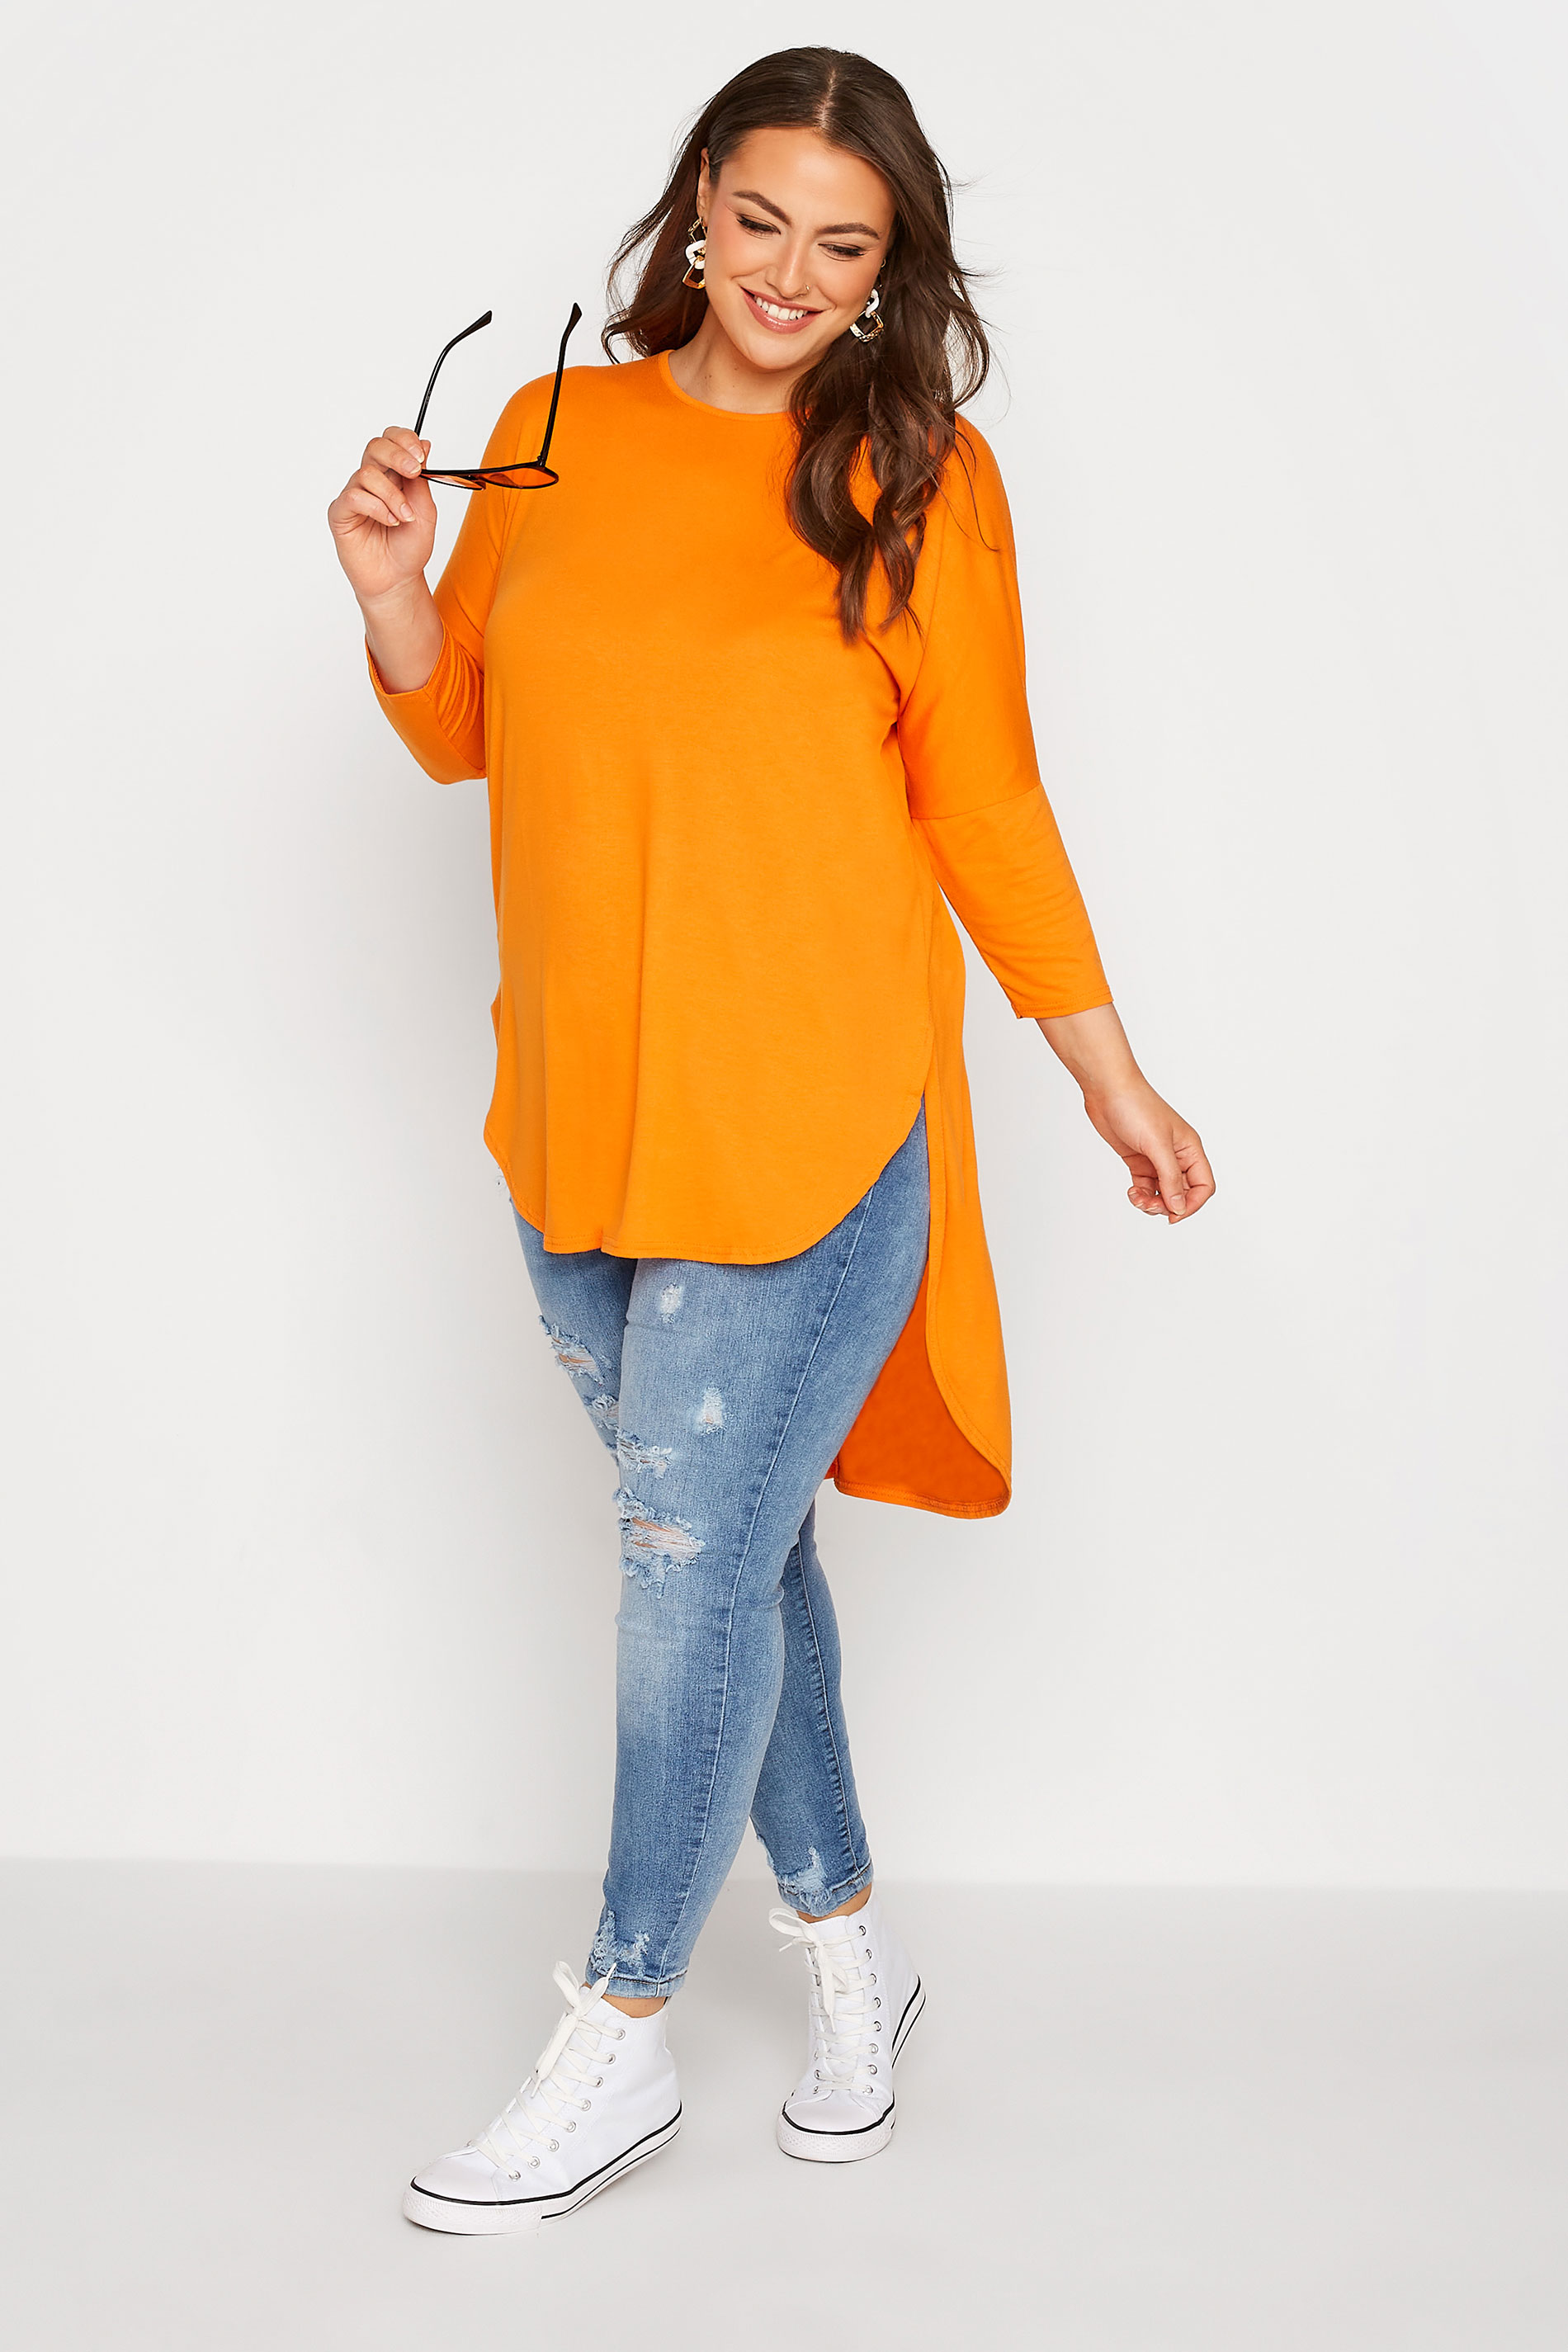 Grande taille  Tops Grande taille  Tops Ourlet Plongeant | LIMITED COLLECTION - T-Shirt Orange Manches Longues Ourlet Plongeant - SU47951